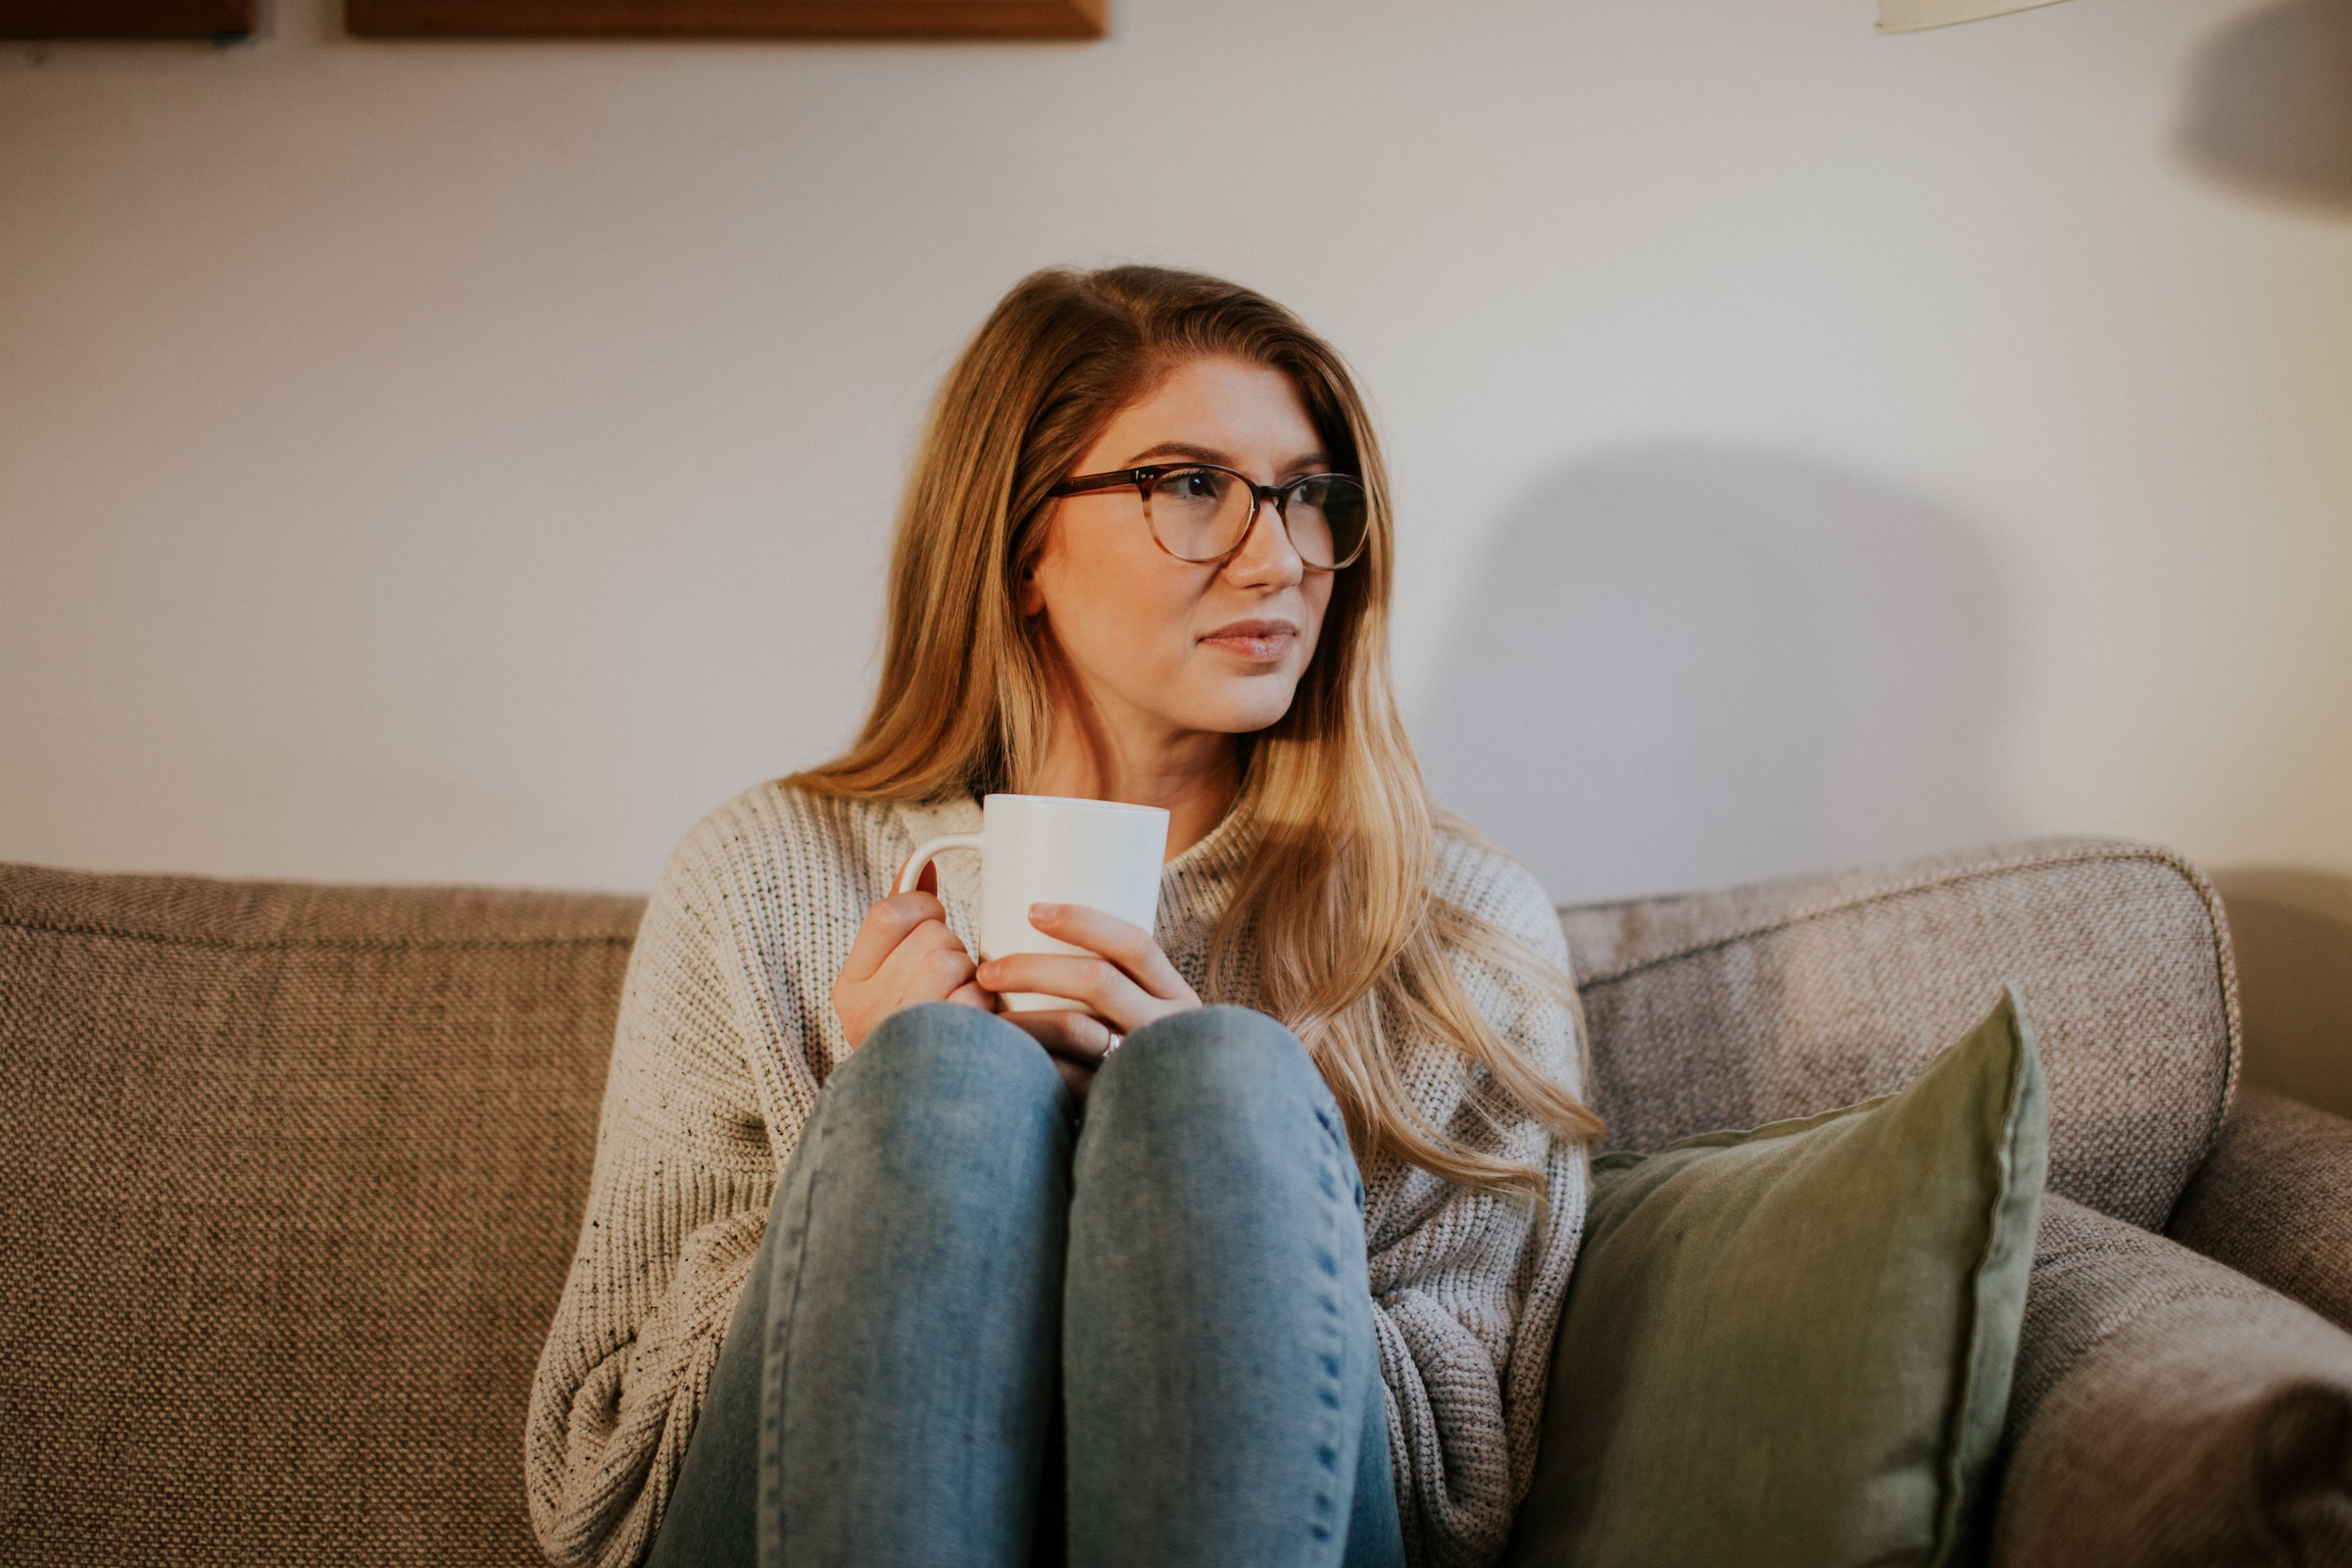 Woman sitting on couch and thinking | Source: Unsplash